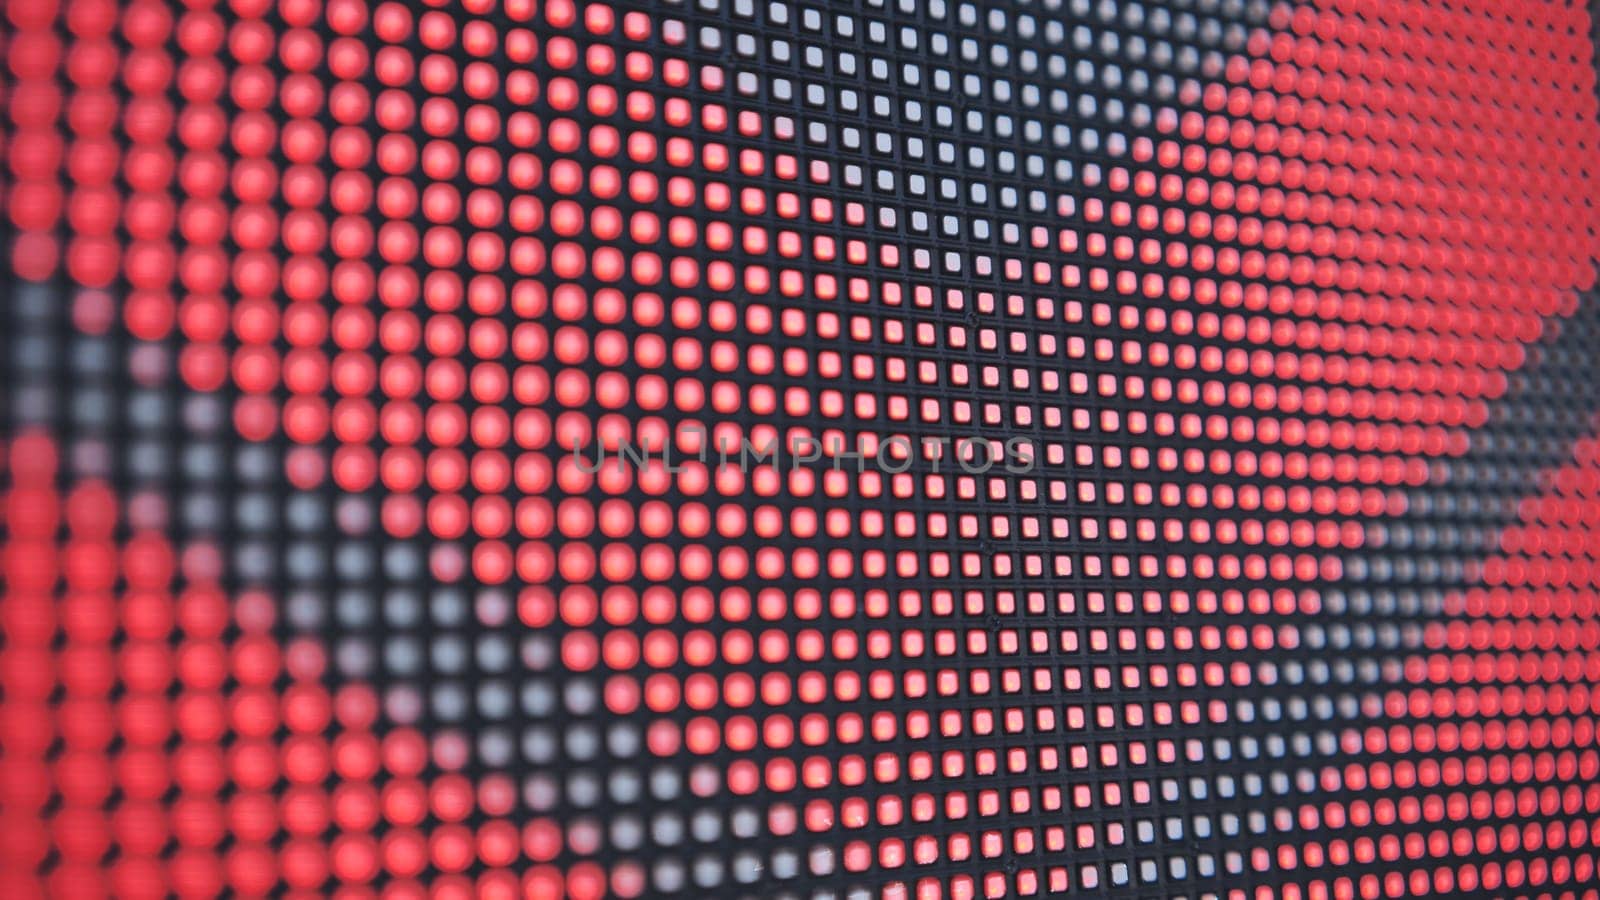 LED screen in operation outside. Close-up view